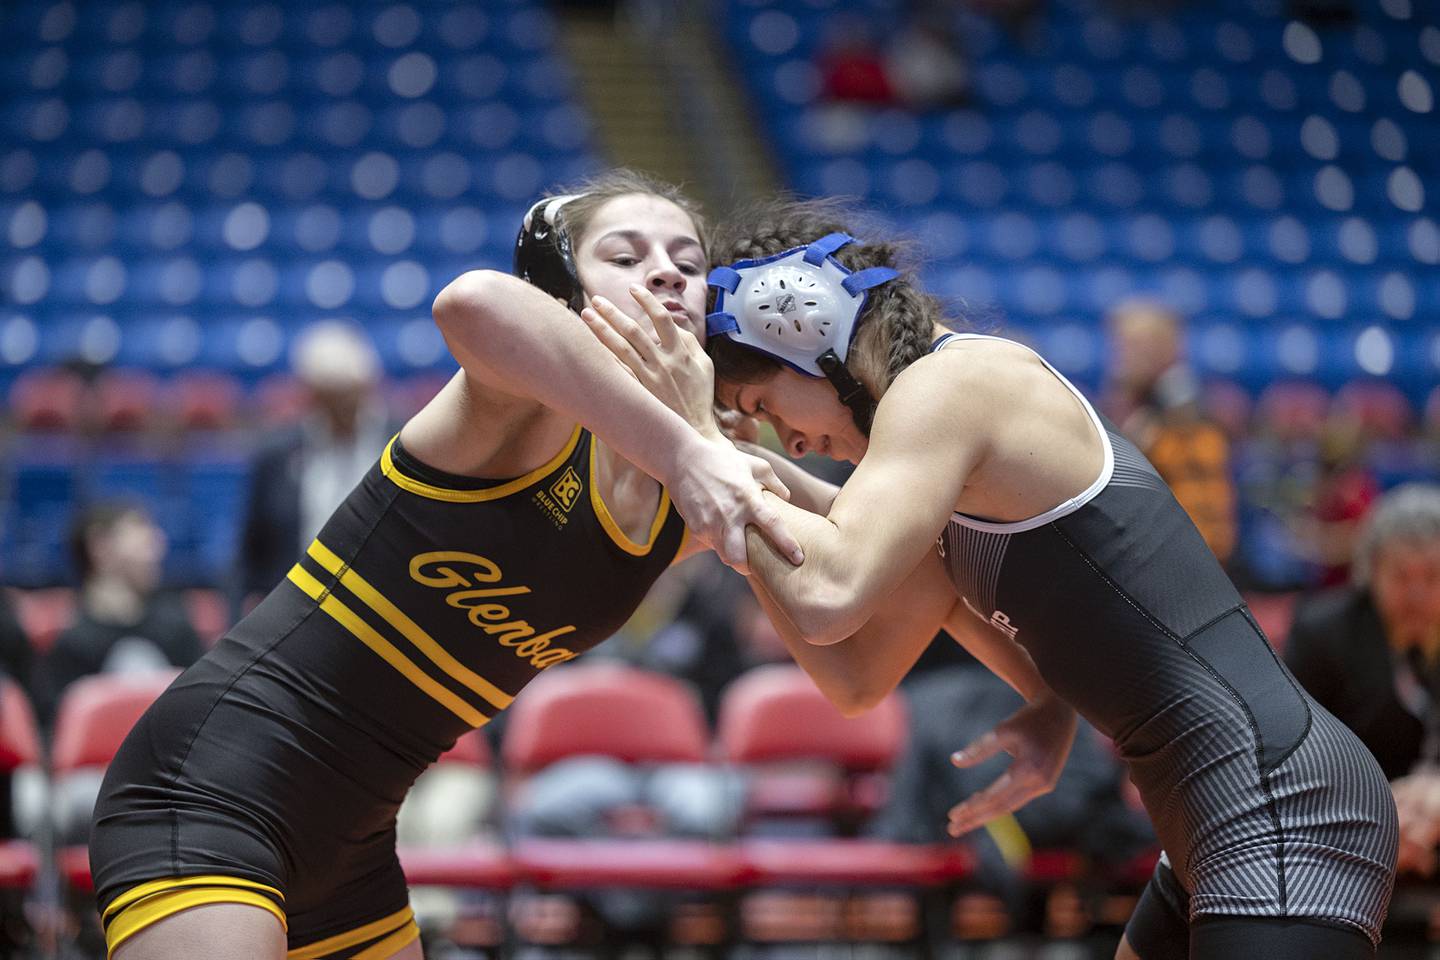 Gabriella Gomez of Glenbard North (left) and Eliana Paramo of Joliet Township (right) lock up during the IHSA Girls Wrestling State Finals on Saturday, Feb. 25, 2023, in Bloomington.